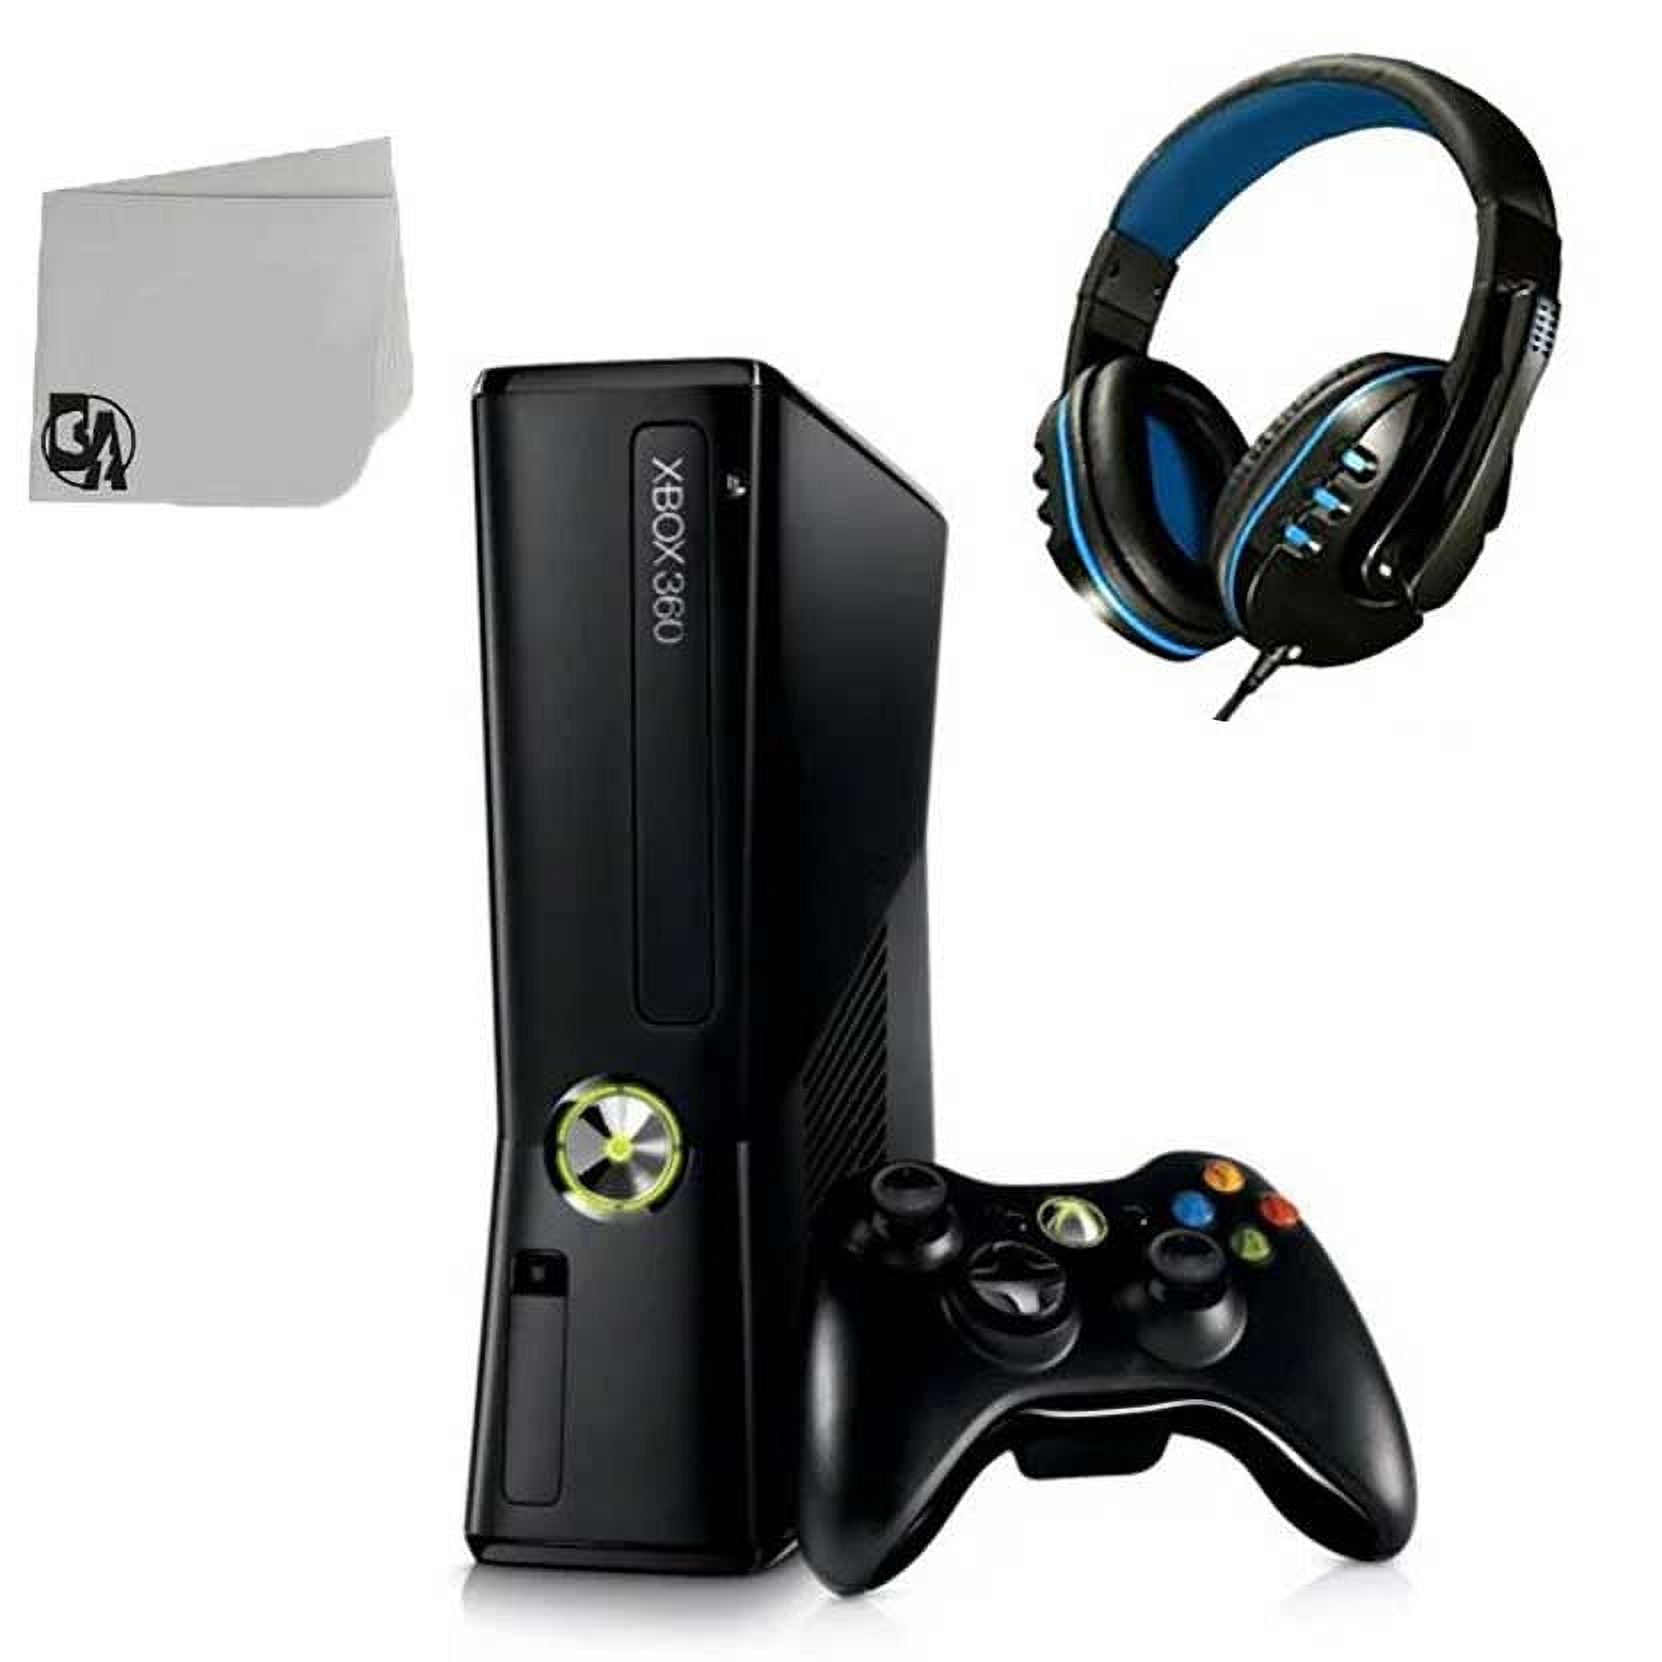 Xbox 360 Slim RGH With Games And Emulators for Sale in